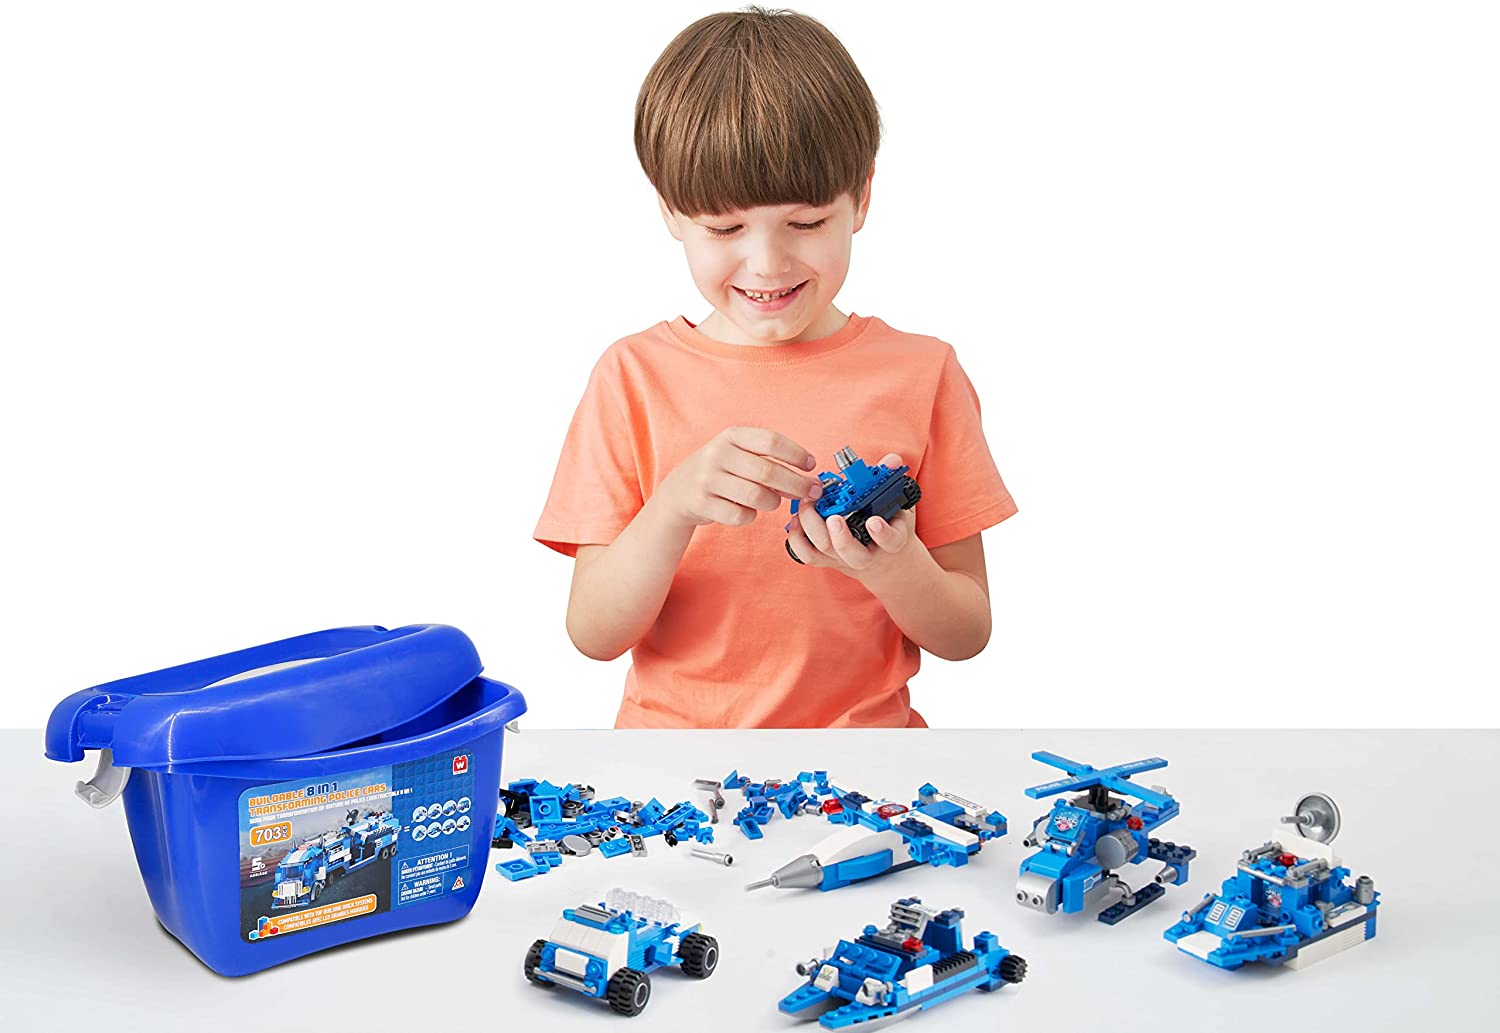 703-Piece Police Command Bucket Value Building Set $10.70 shipped w/ Prime